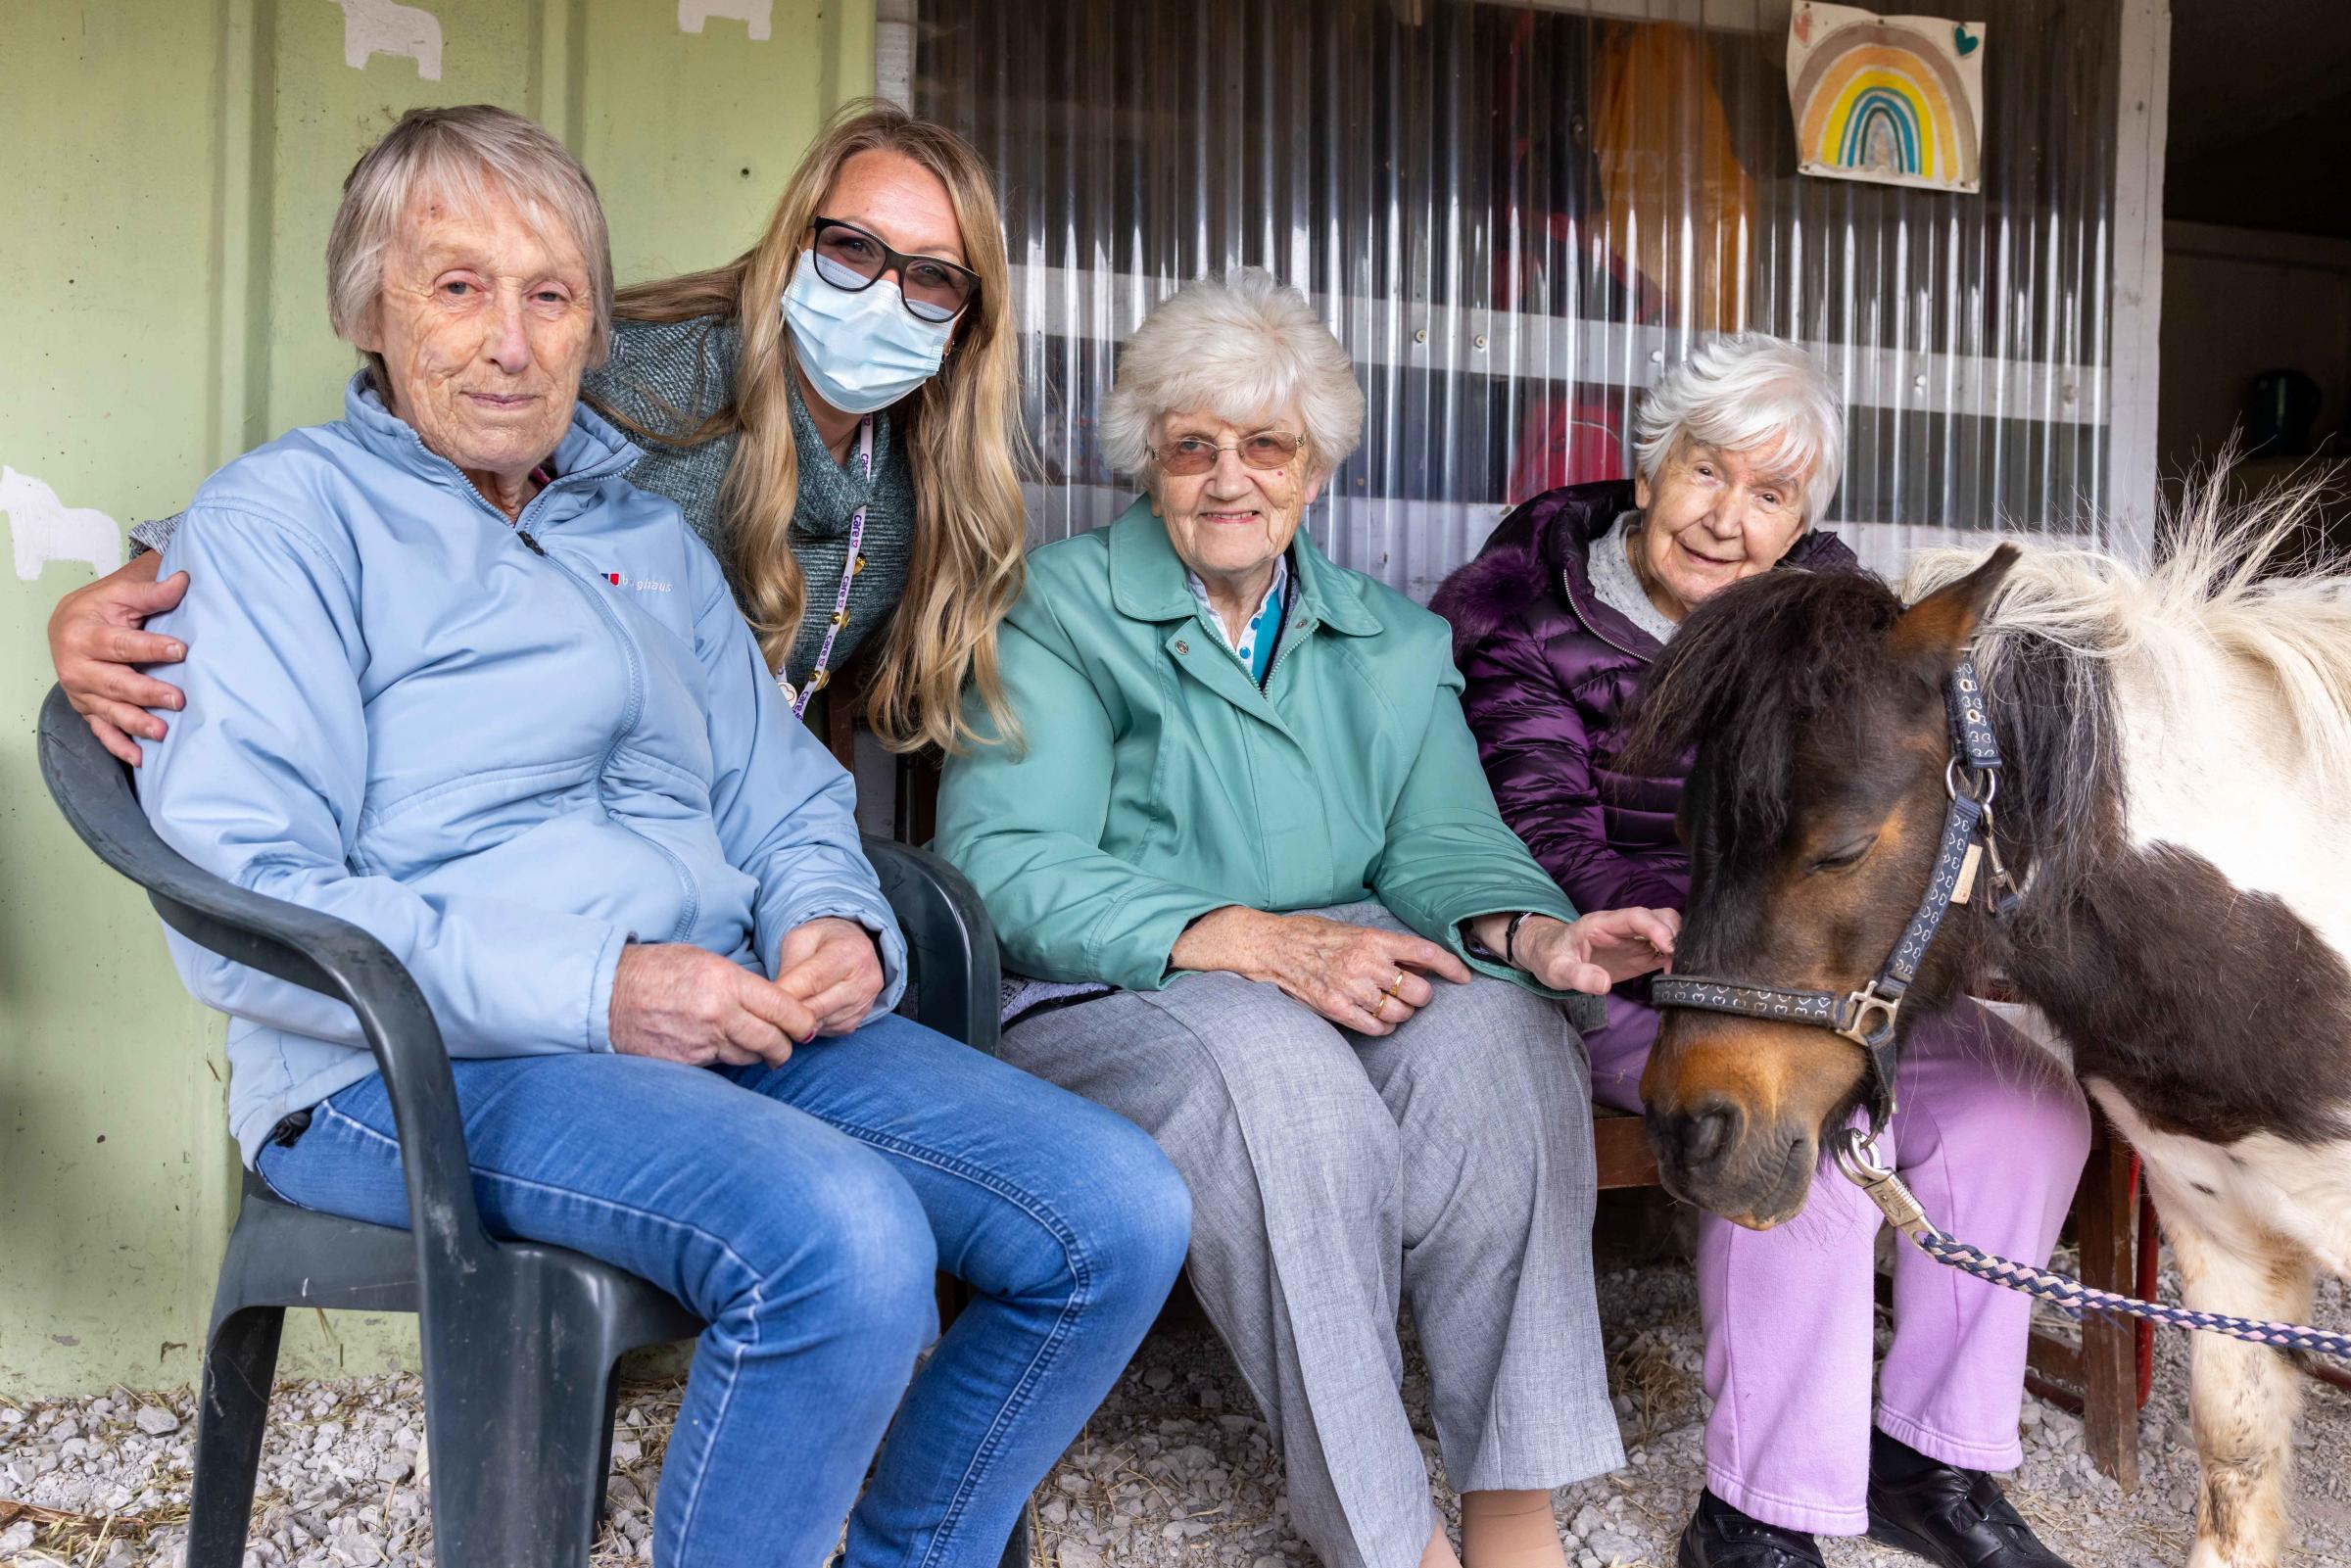 Deewater Grange care home residents visit Spirit of the Herd Sanctuary, Frodsham. Residents Diana Hughes, Jean Charlton and Hilda Rollason with Sally Cooper, Deewater Grange care home manager behind.